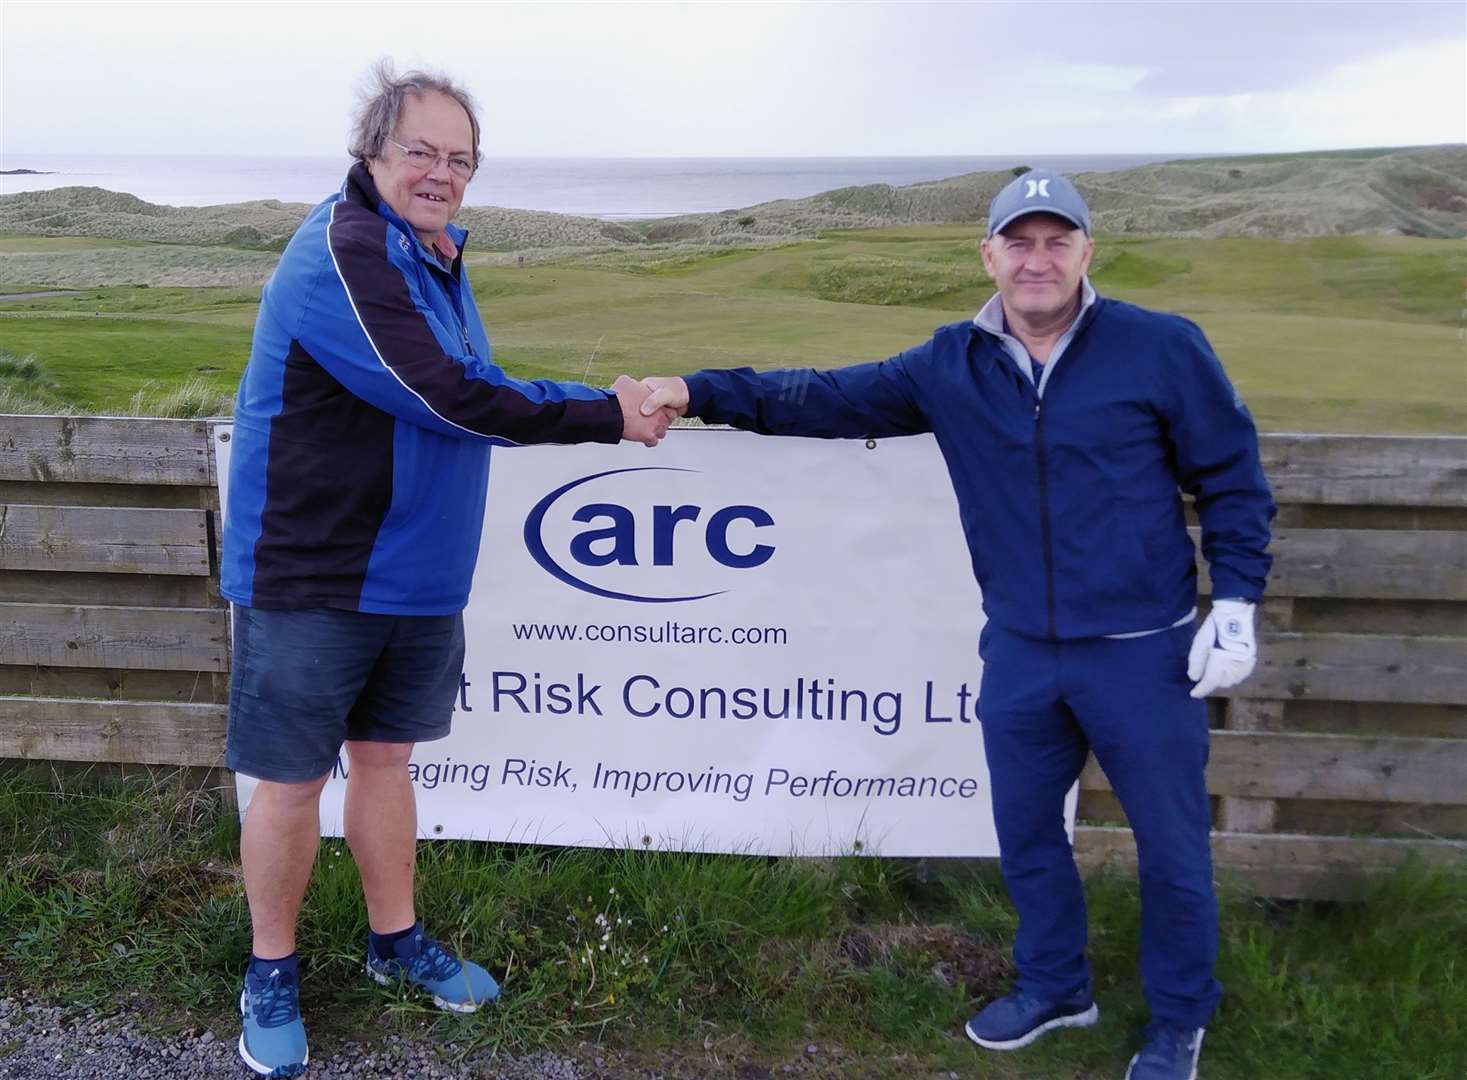 Willie Steven (right), winner of the recent ARC Open Stableford, being congratulated by Mike Halliday.